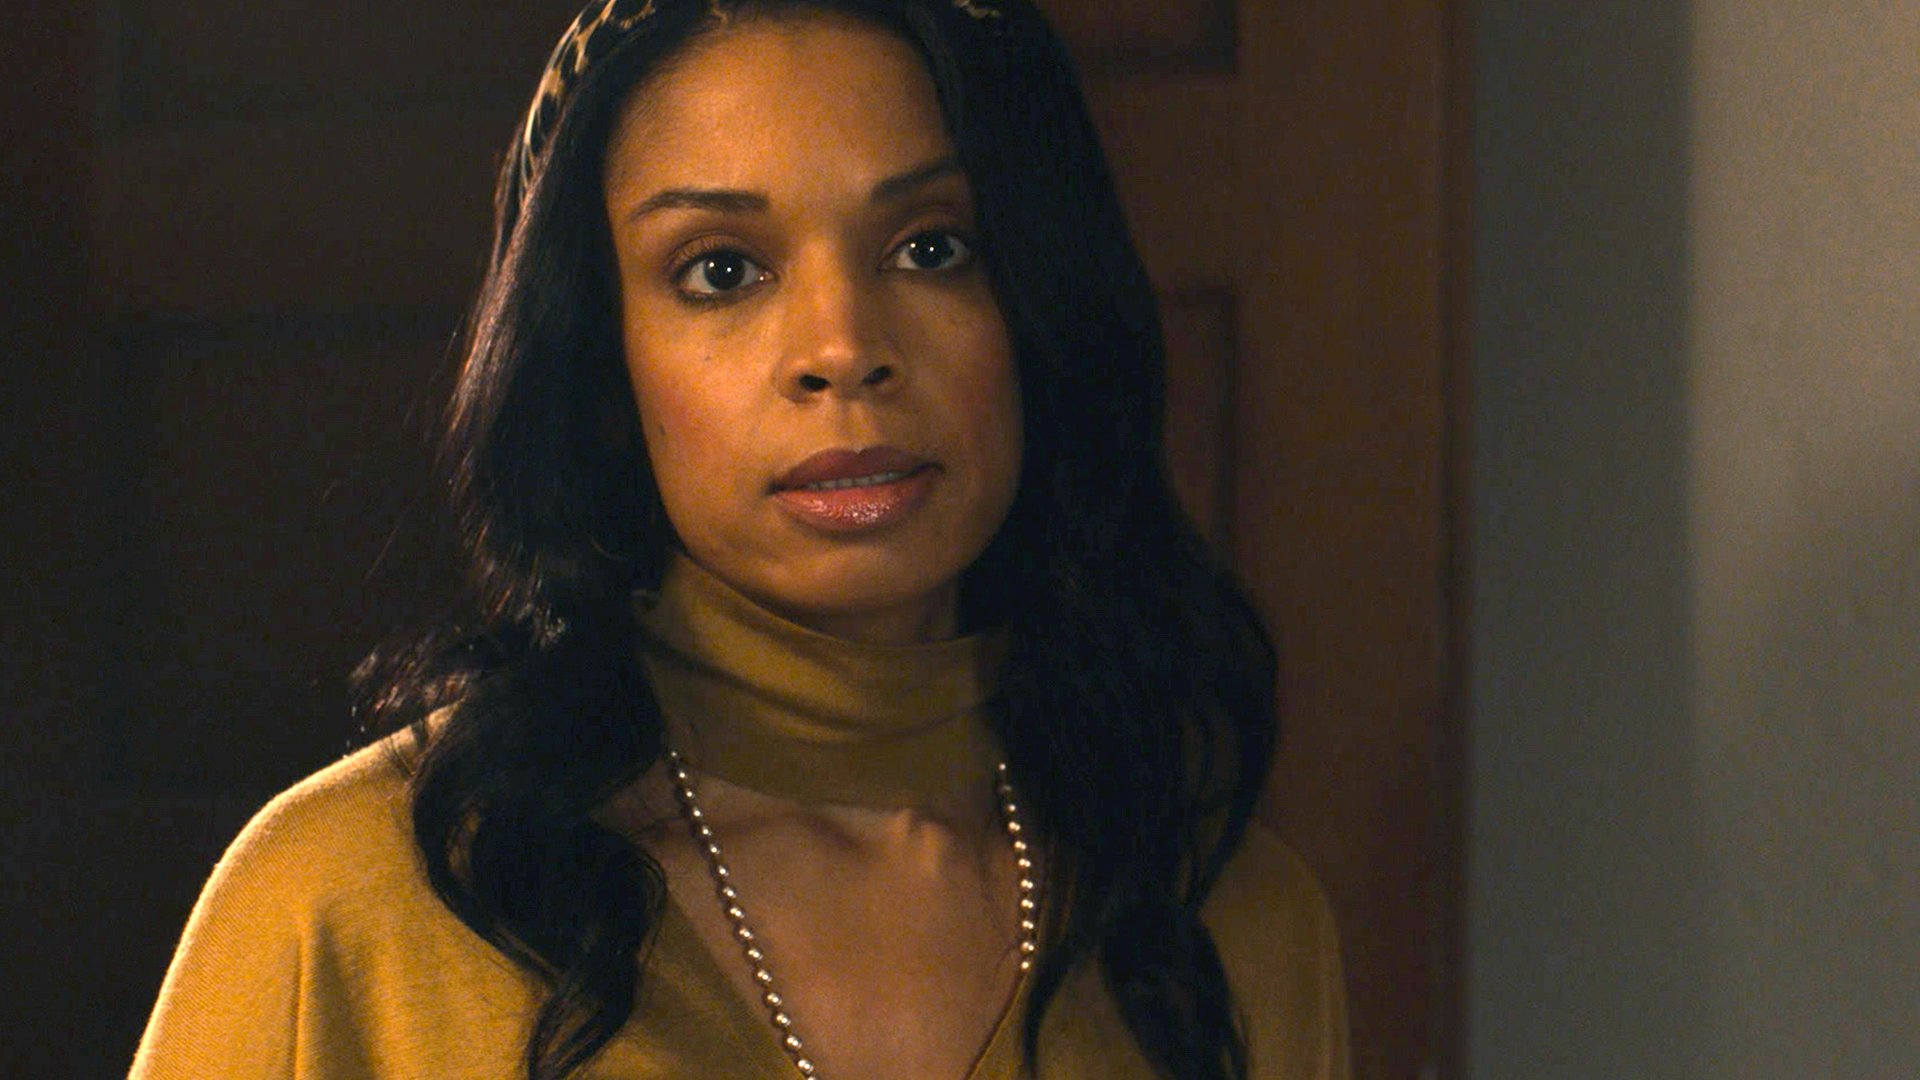 Susan Kelechi Watson as Beth Pearson looking concerned in ‘This Is Us’ Season 5 Episode 10